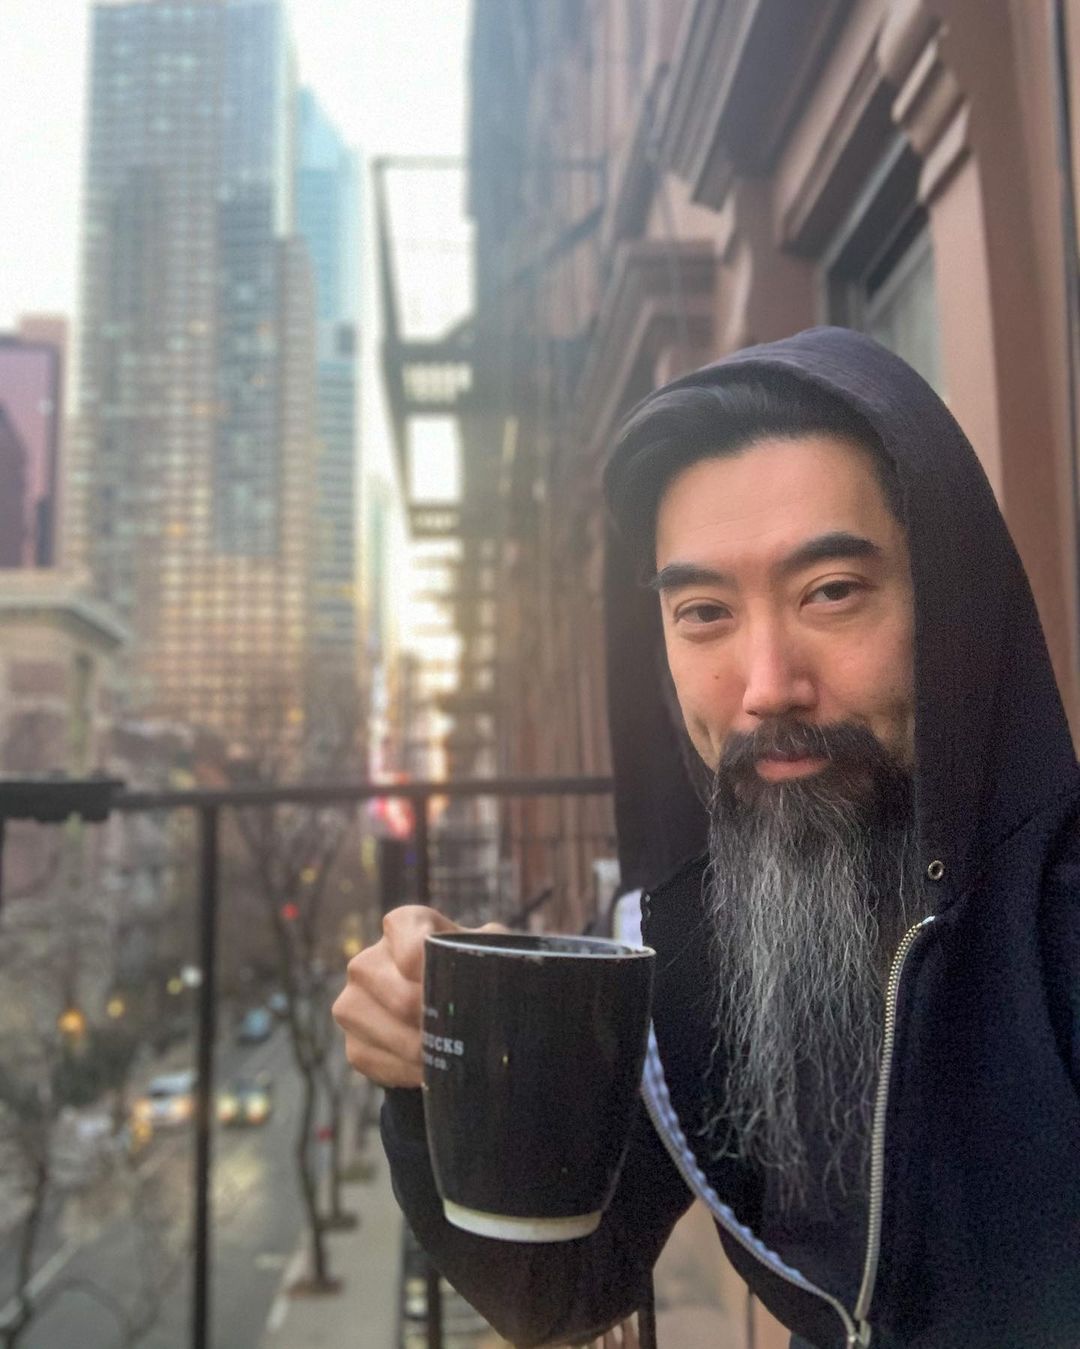 9 Cool Asian Beard Ideas You Should Try Out - The Modest Man